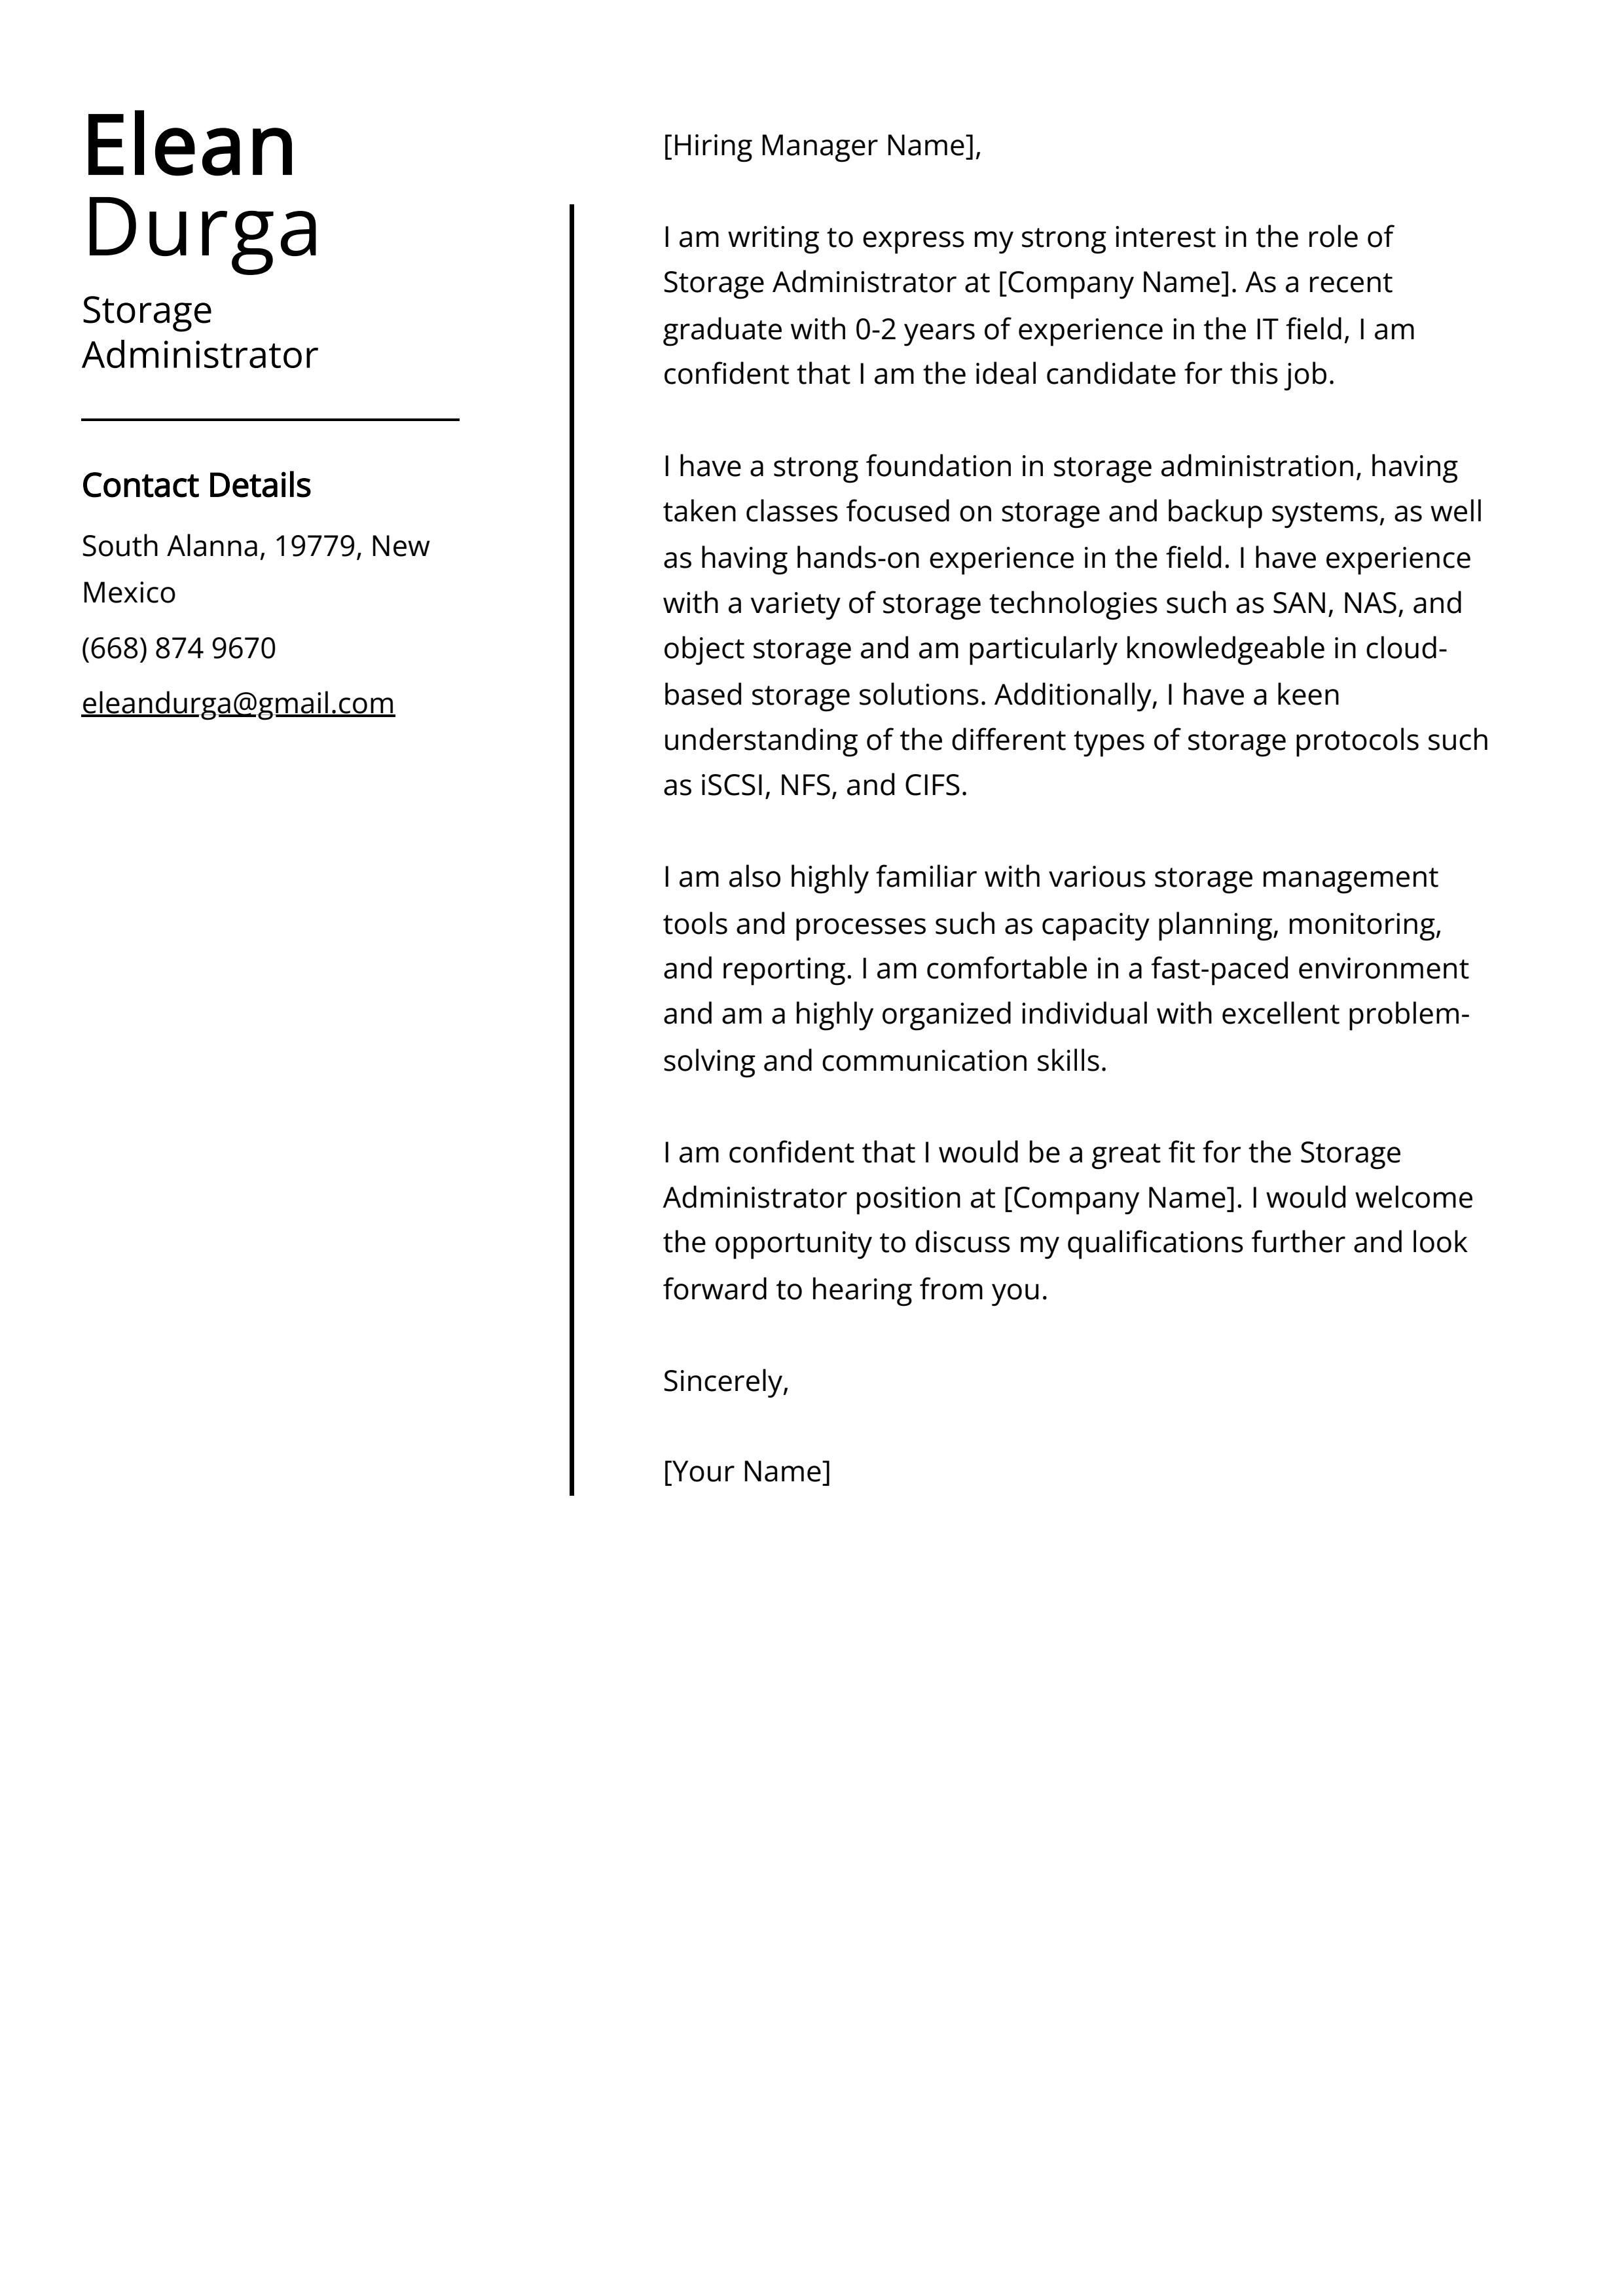 Storage Administrator Cover Letter Example